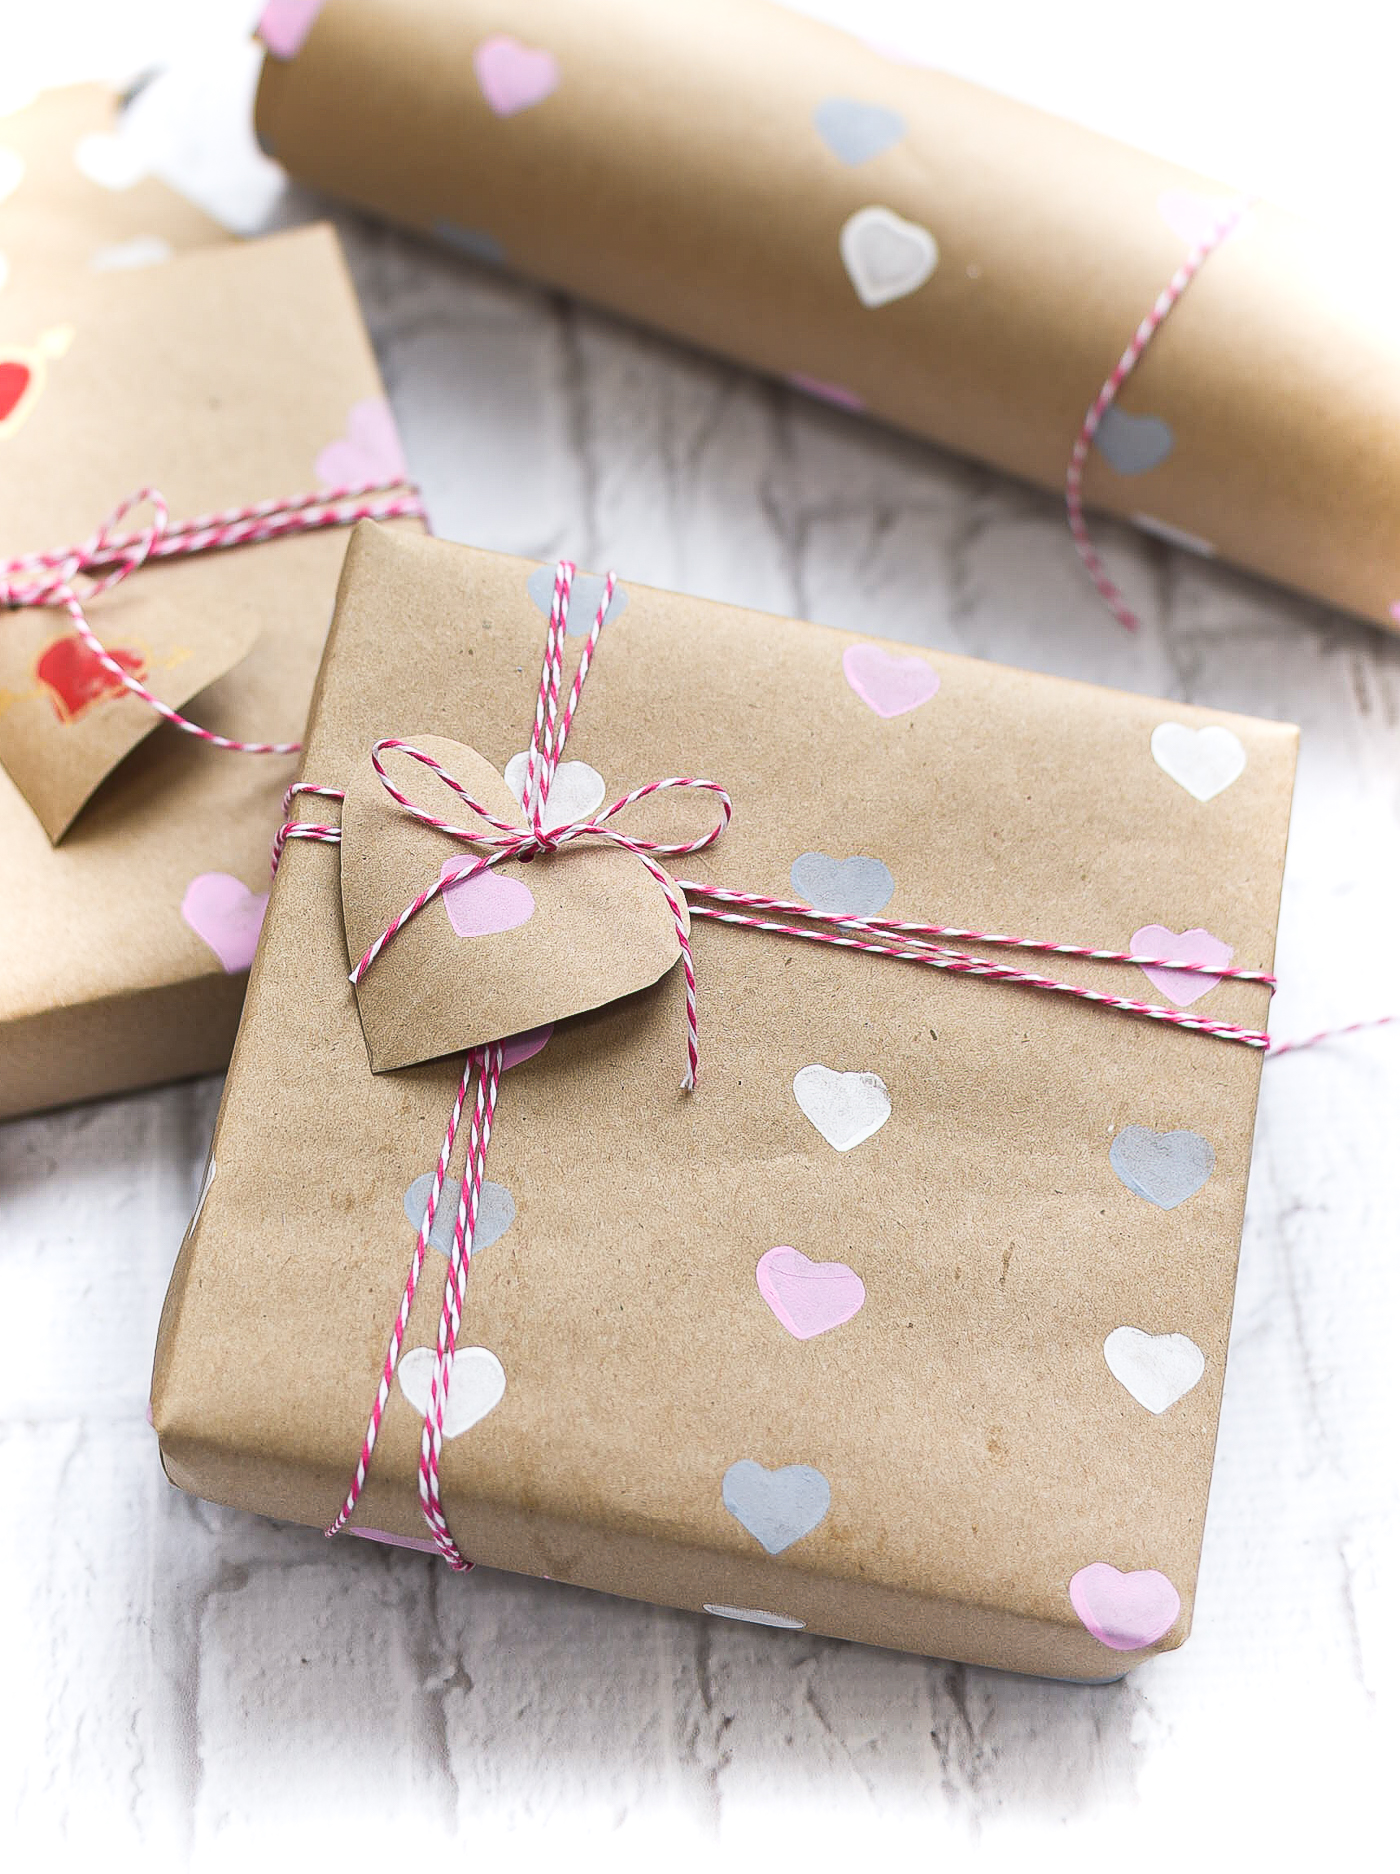 Valentine's Day Wrapping Paper and Gift Tags (Free!) - DIY Candy